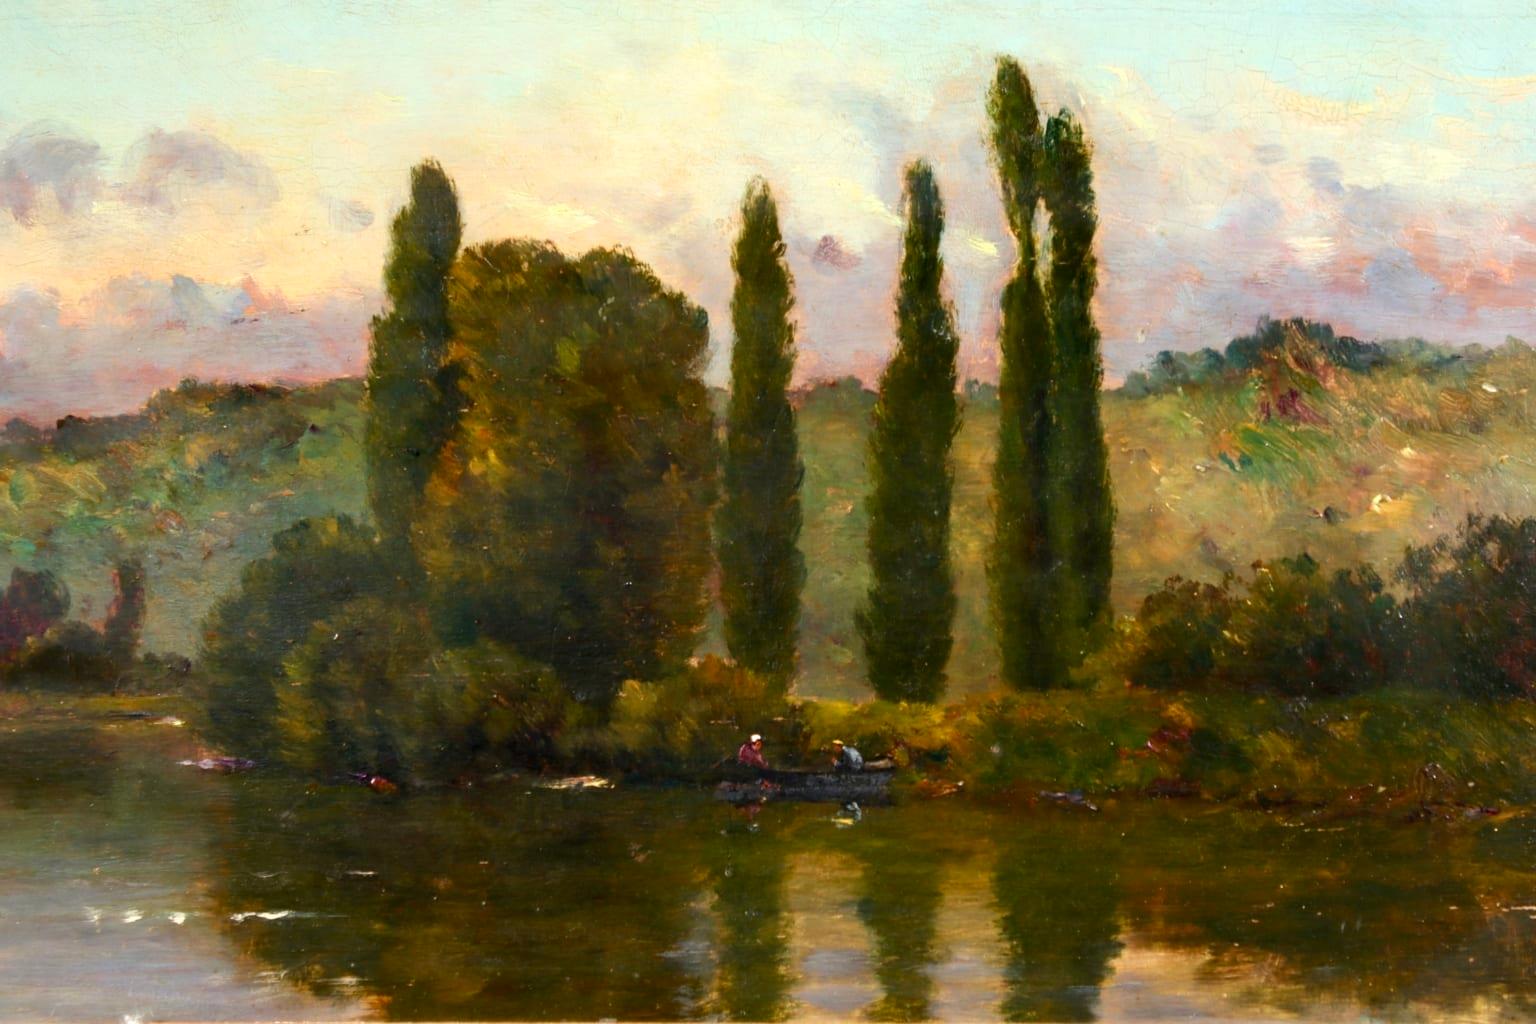 On the Seine - Barbizon Oil, Figures on River in Landscape by Hippolyte Delpy - Gray Landscape Painting by Hippolyte Camille Delpy